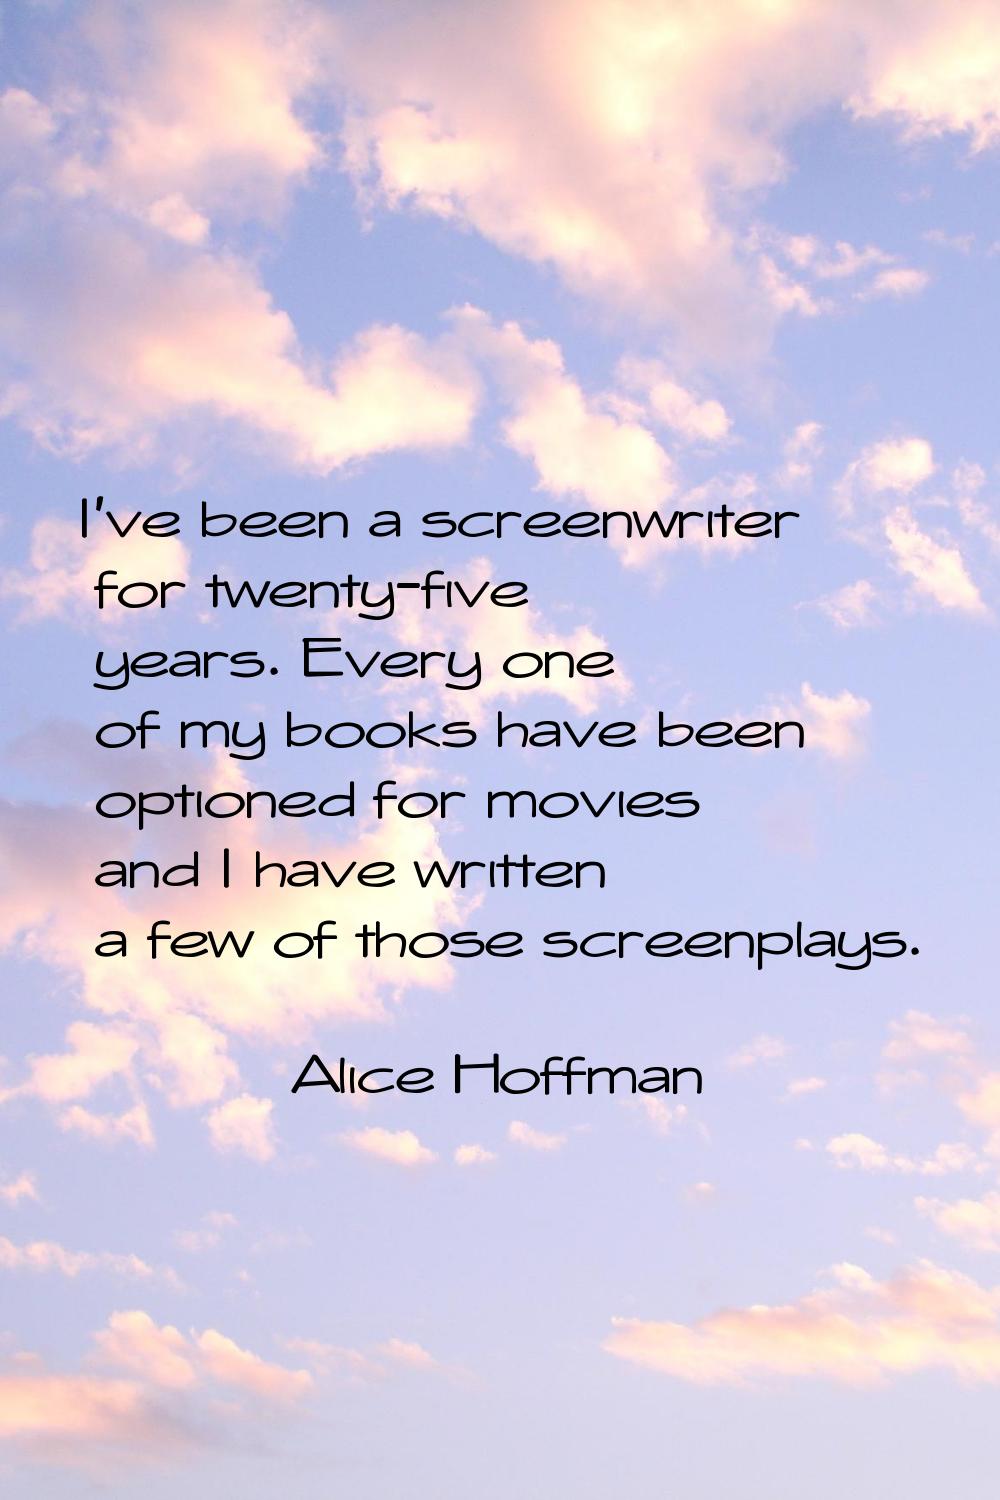 I've been a screenwriter for twenty-five years. Every one of my books have been optioned for movies